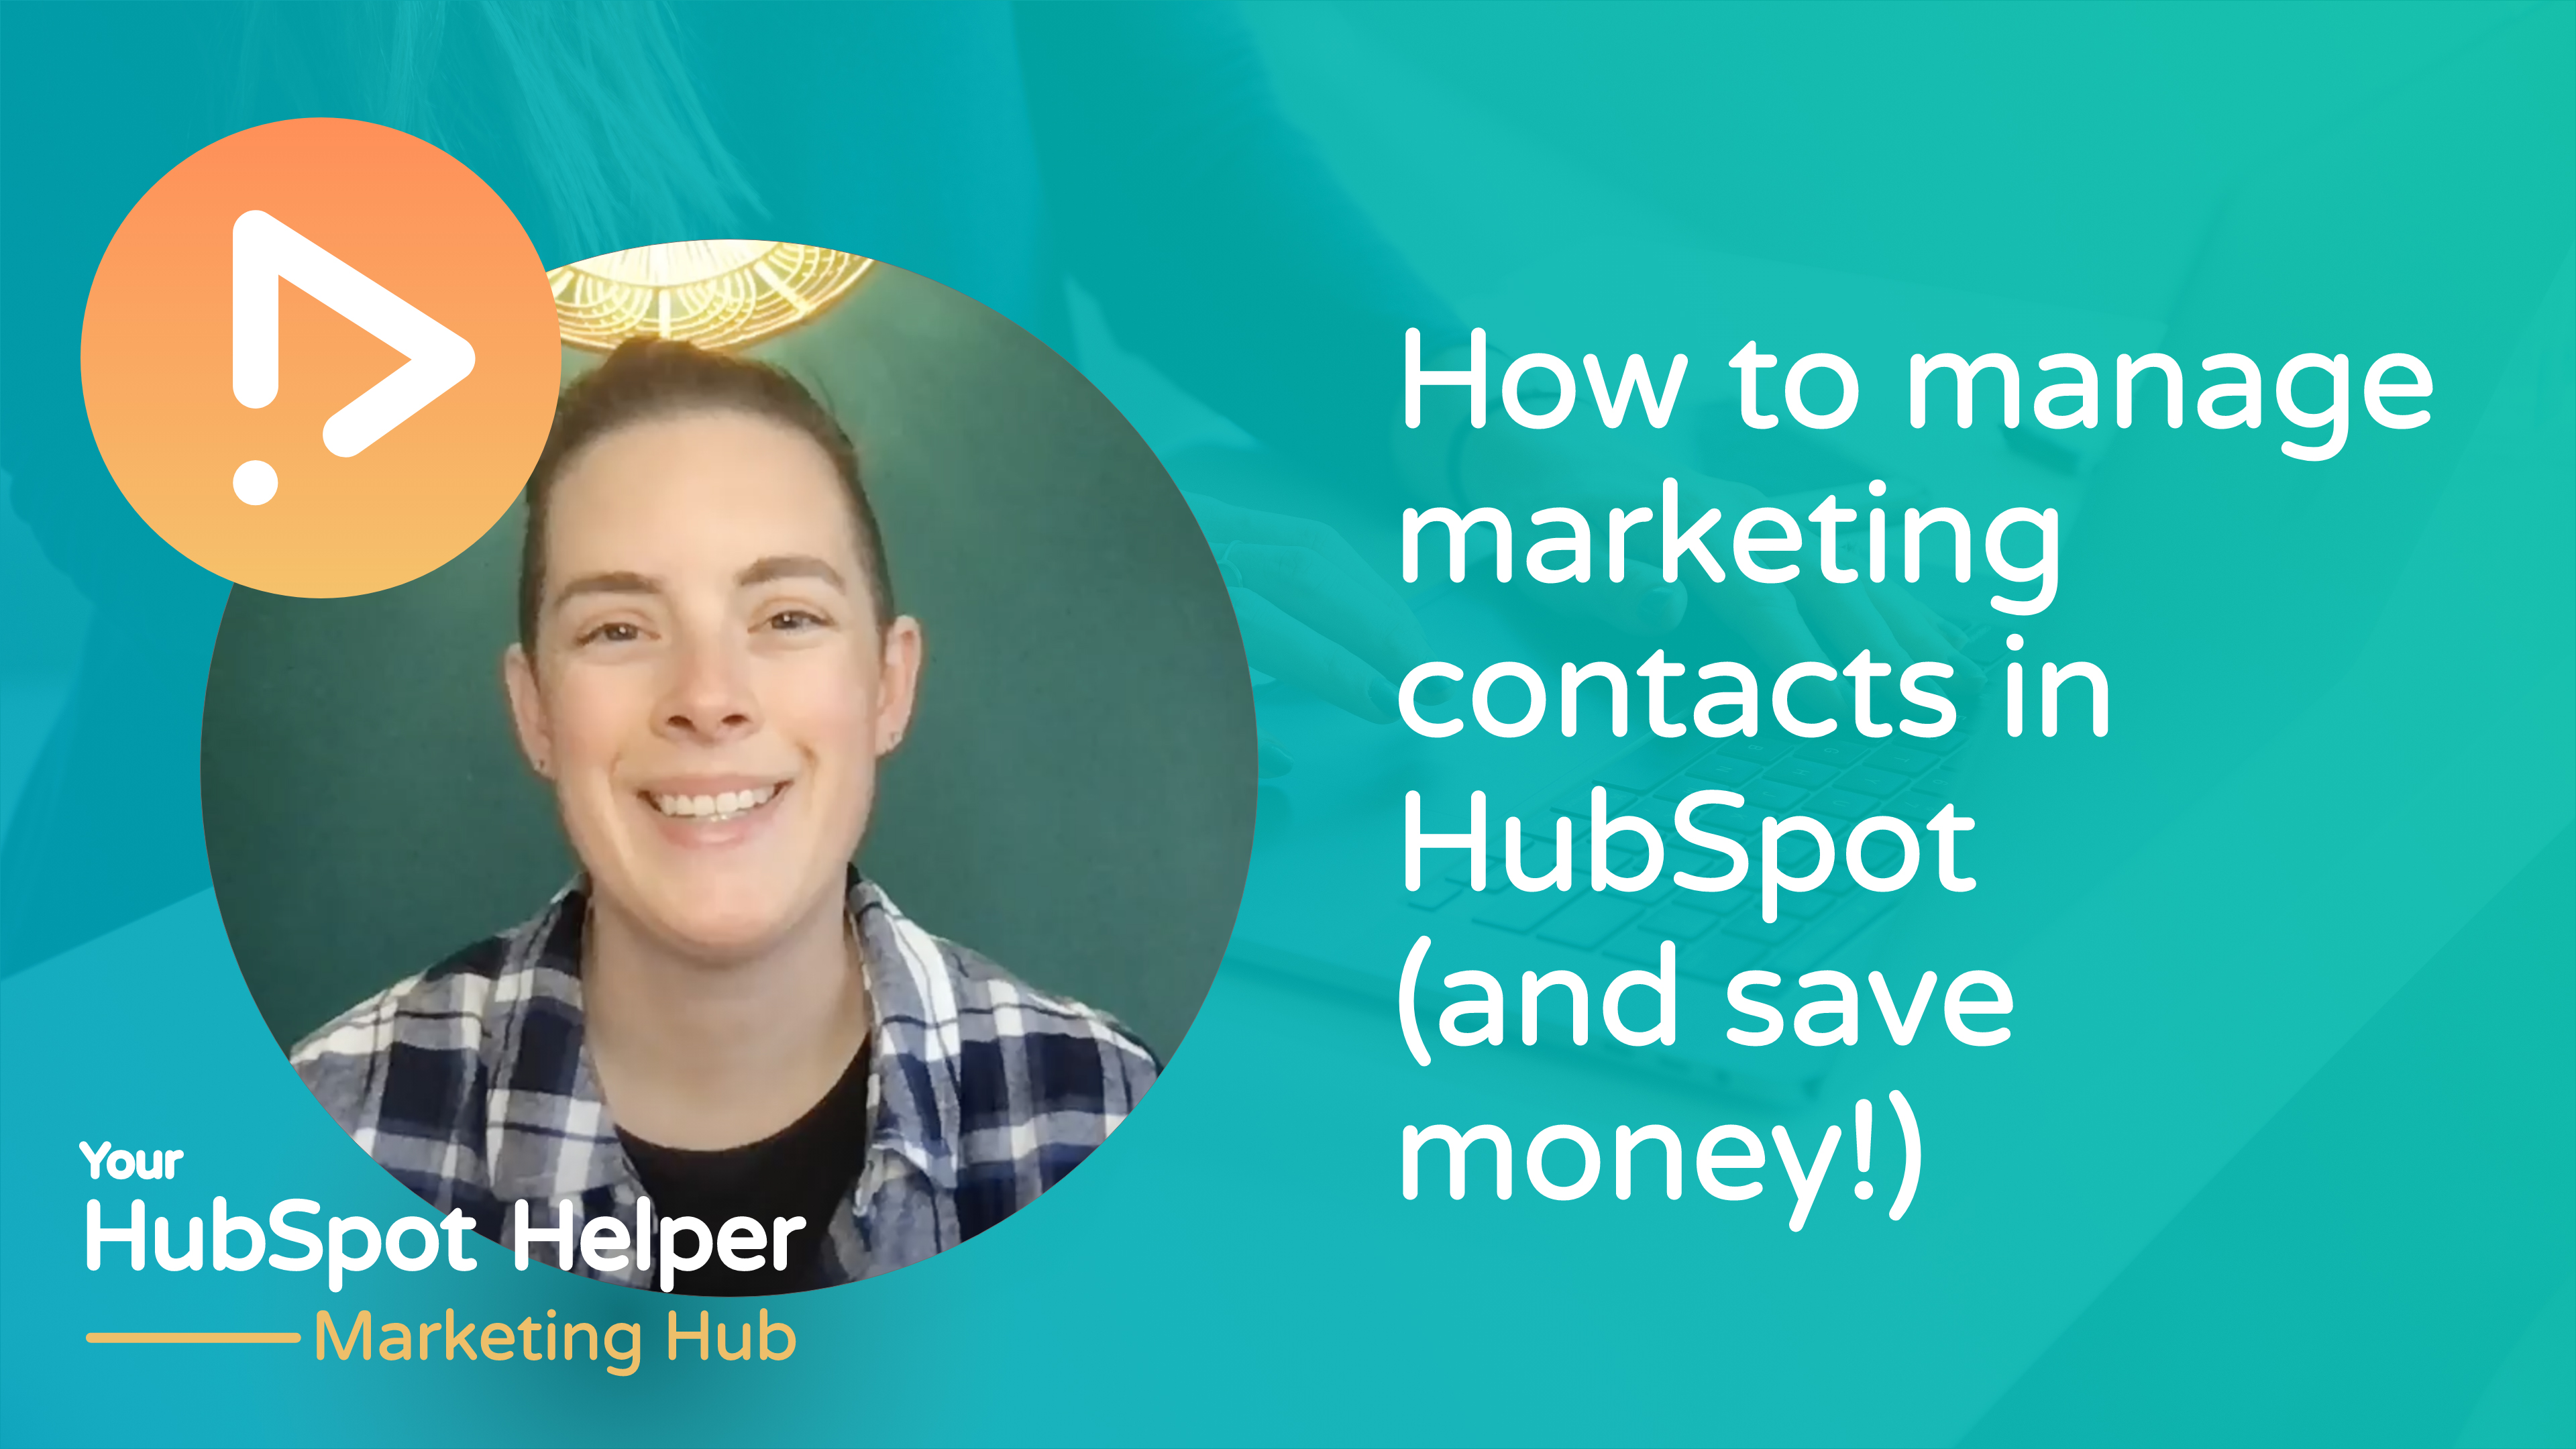 How to manage marketing contacts in HubSpot (and save money!)